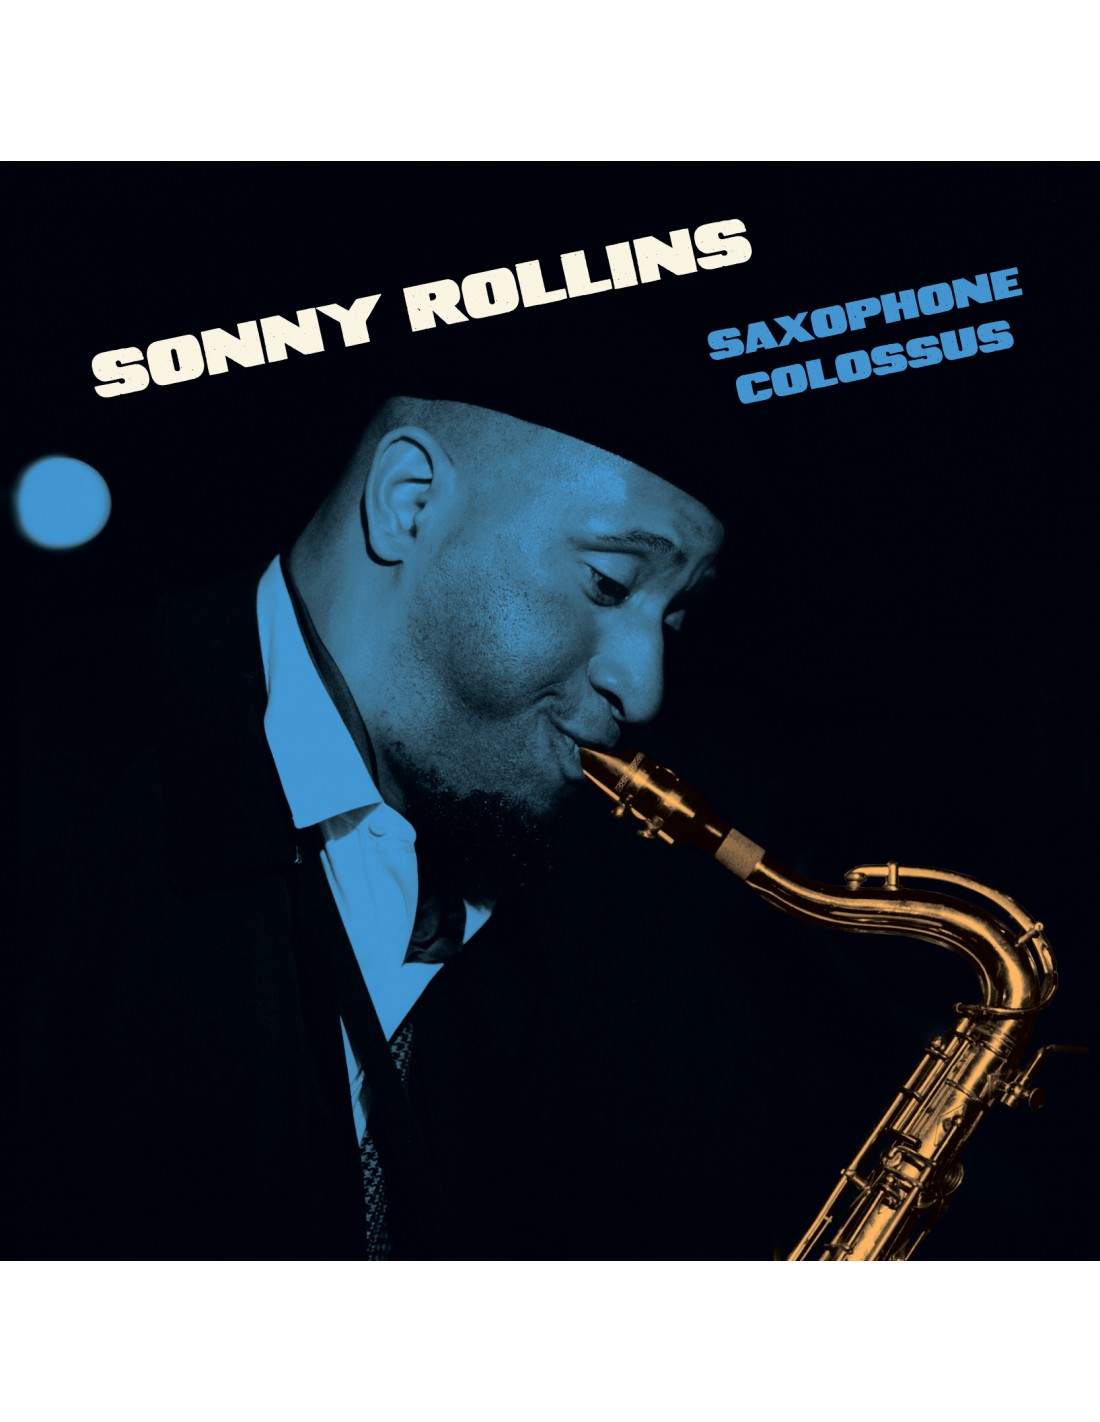 SONNY ROLLINS - SAXOPHONE COLOSSUS